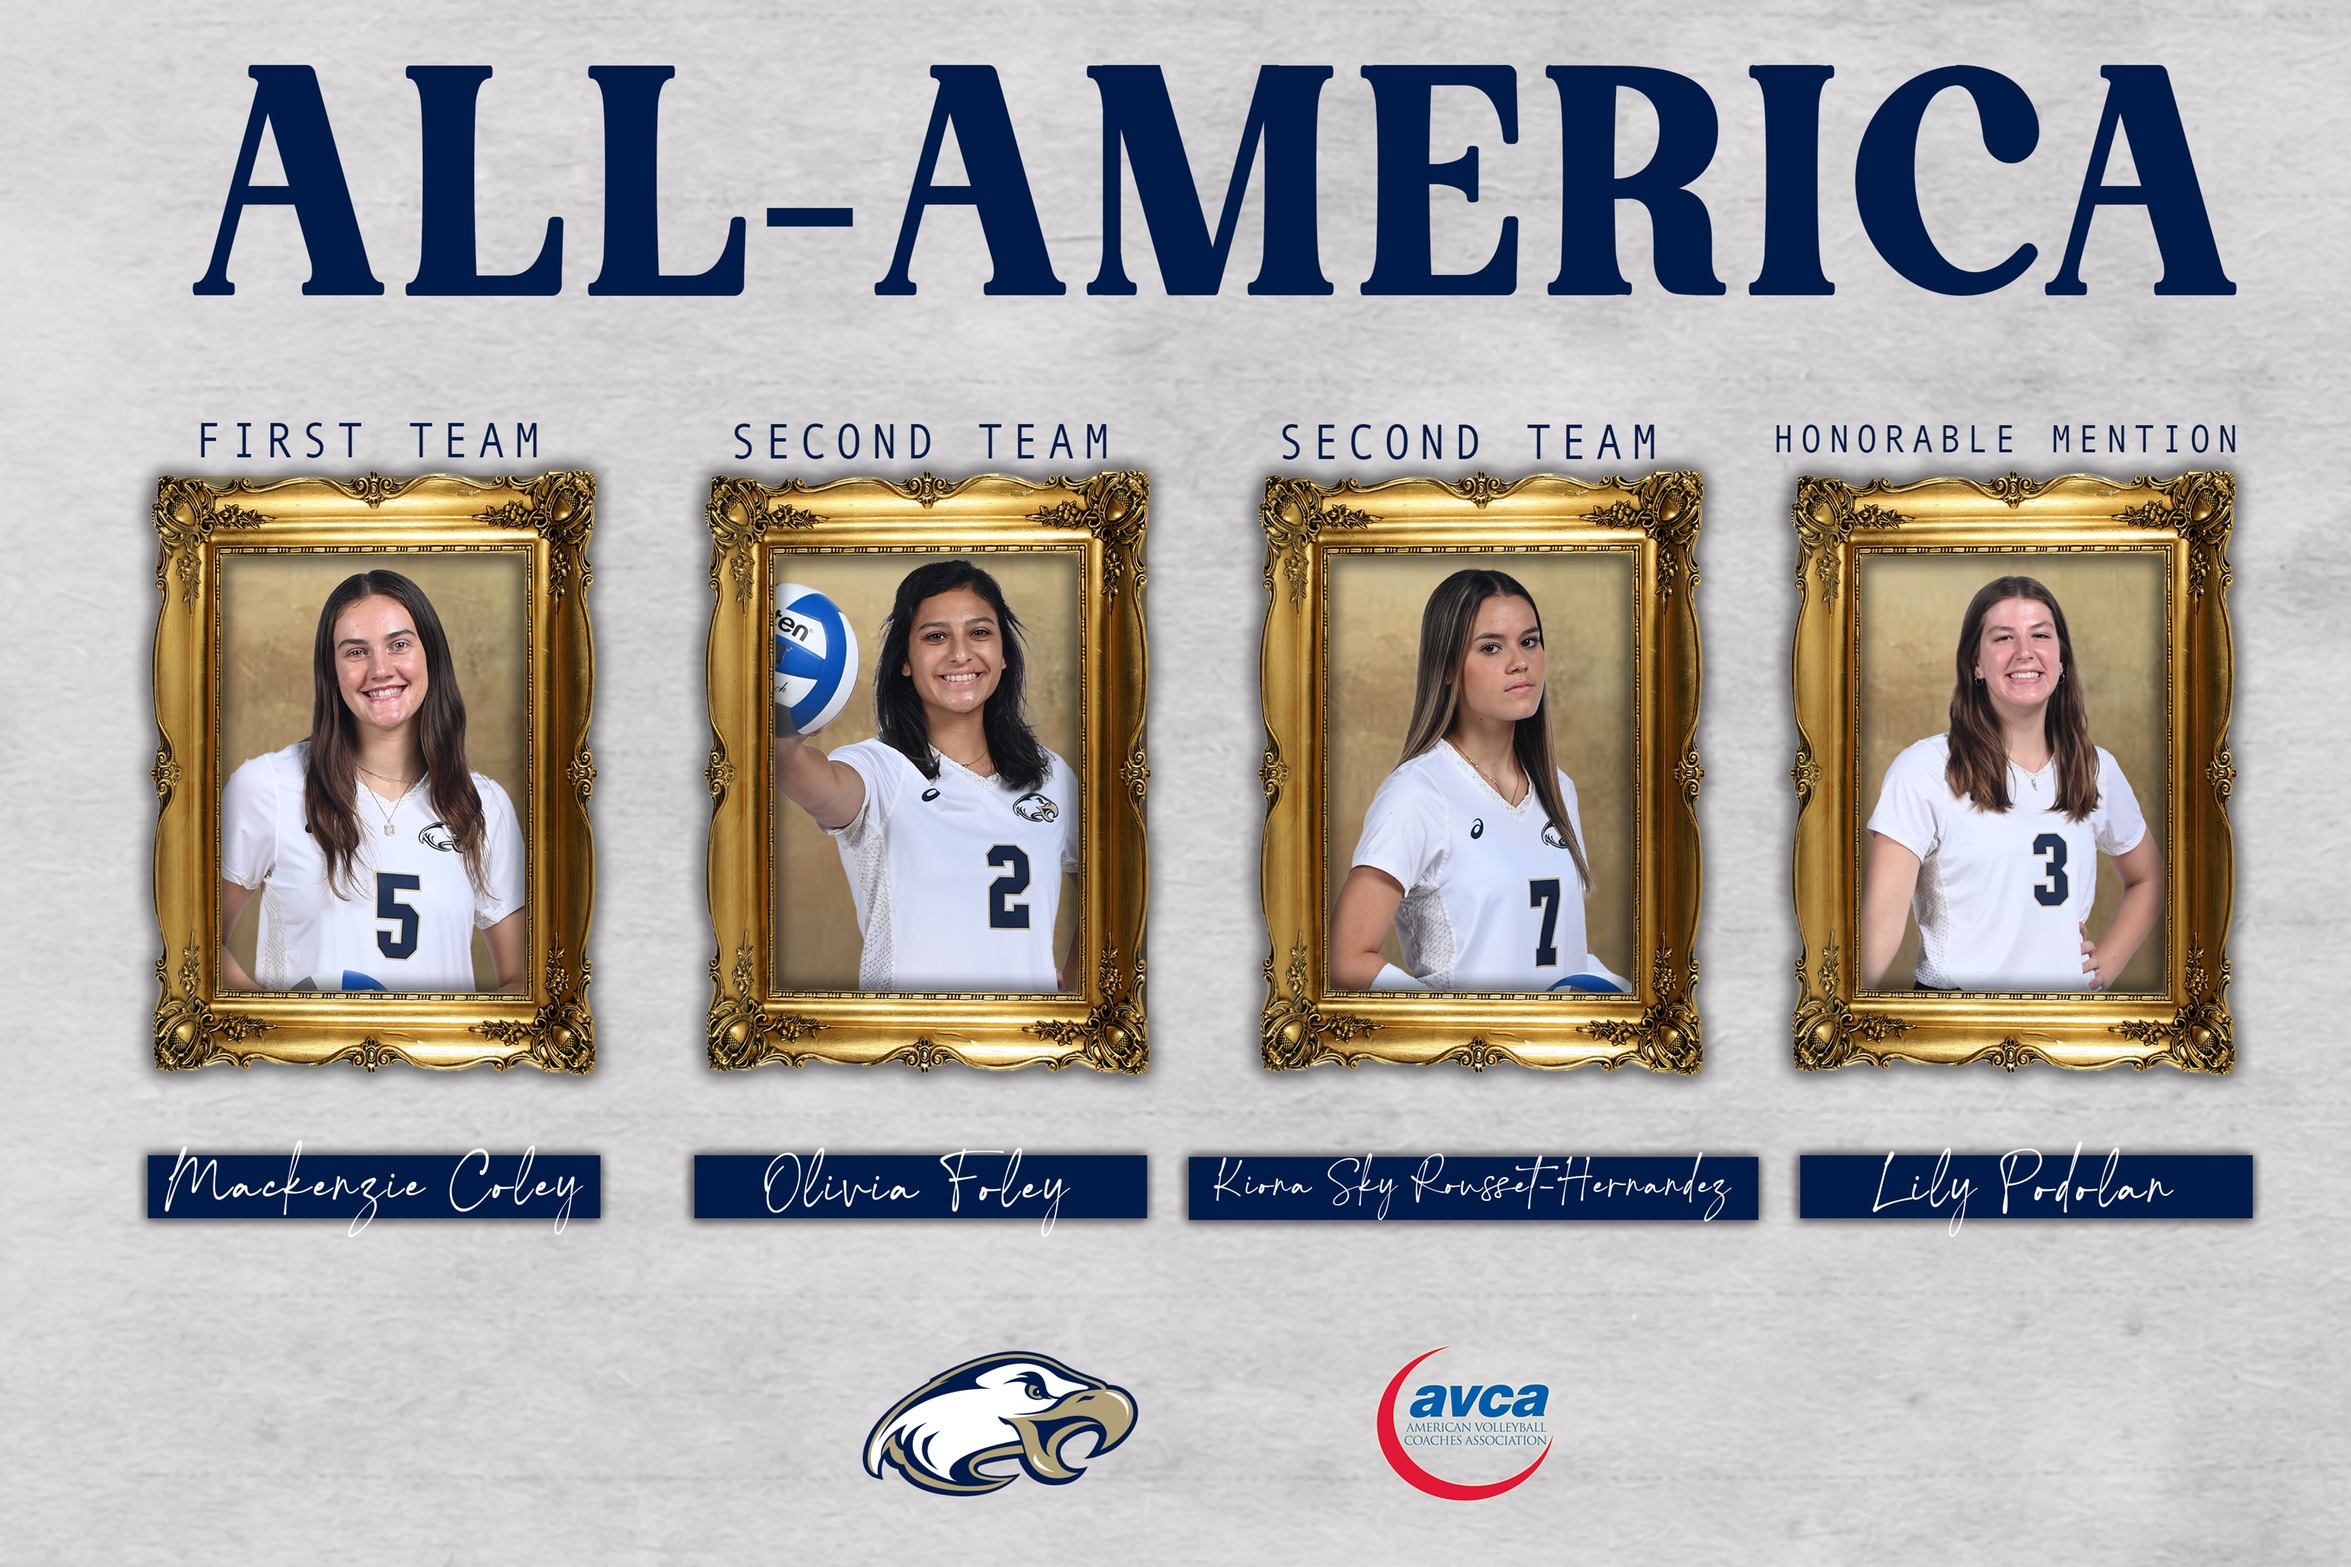 Coley Tabbed First Team All-America, Foley and Rousset-Hernandez Named to Second Team, Podolan Garnered Honorable Mention